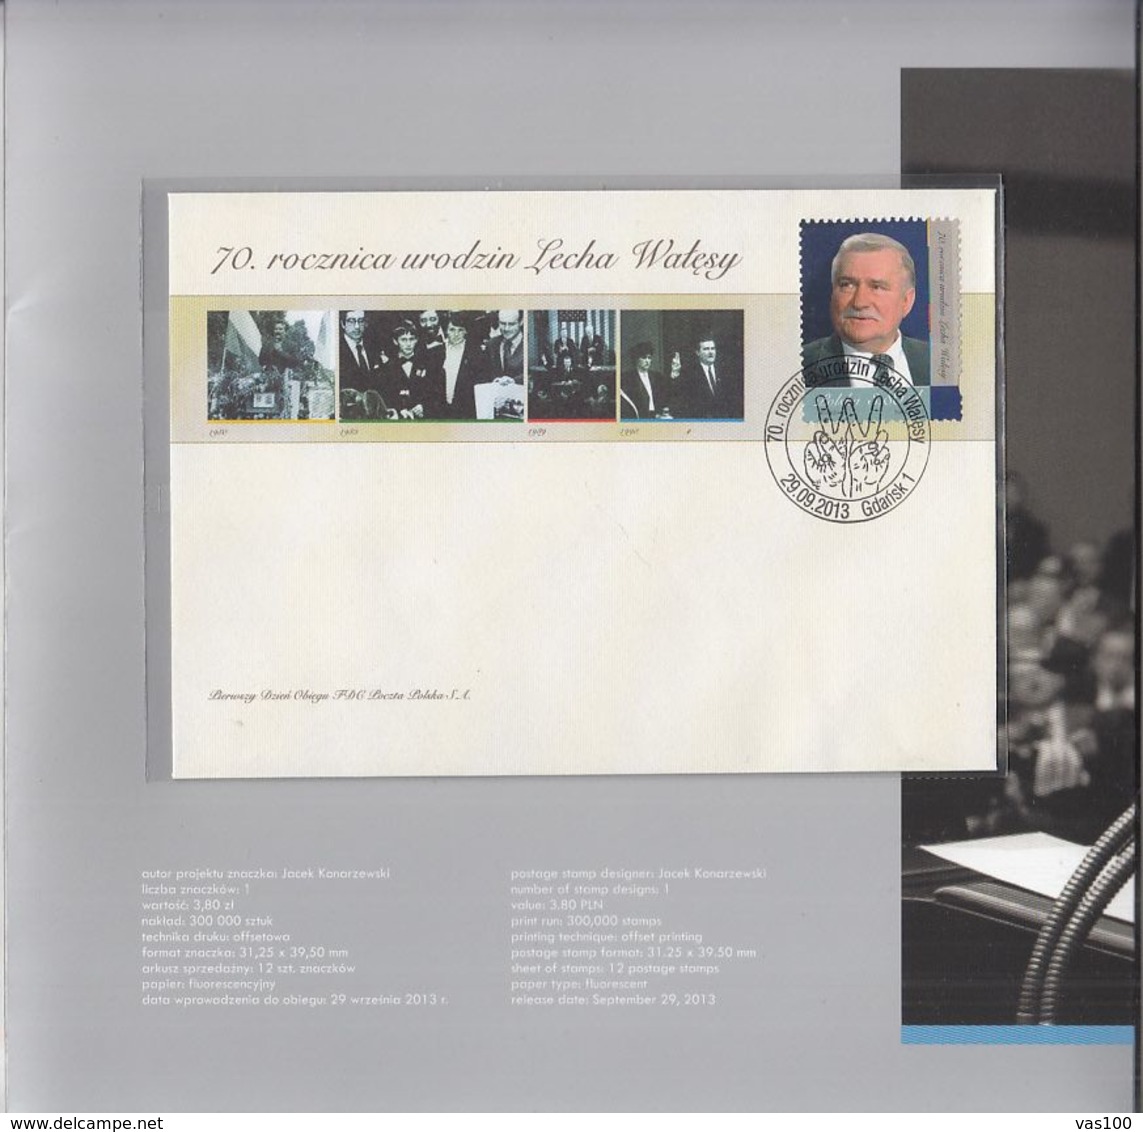 LECH WALESA ANNIVERSARY BOOKLET WITH COVER FDC AND RED BIG COVER, 2013, POLAND - Libretti